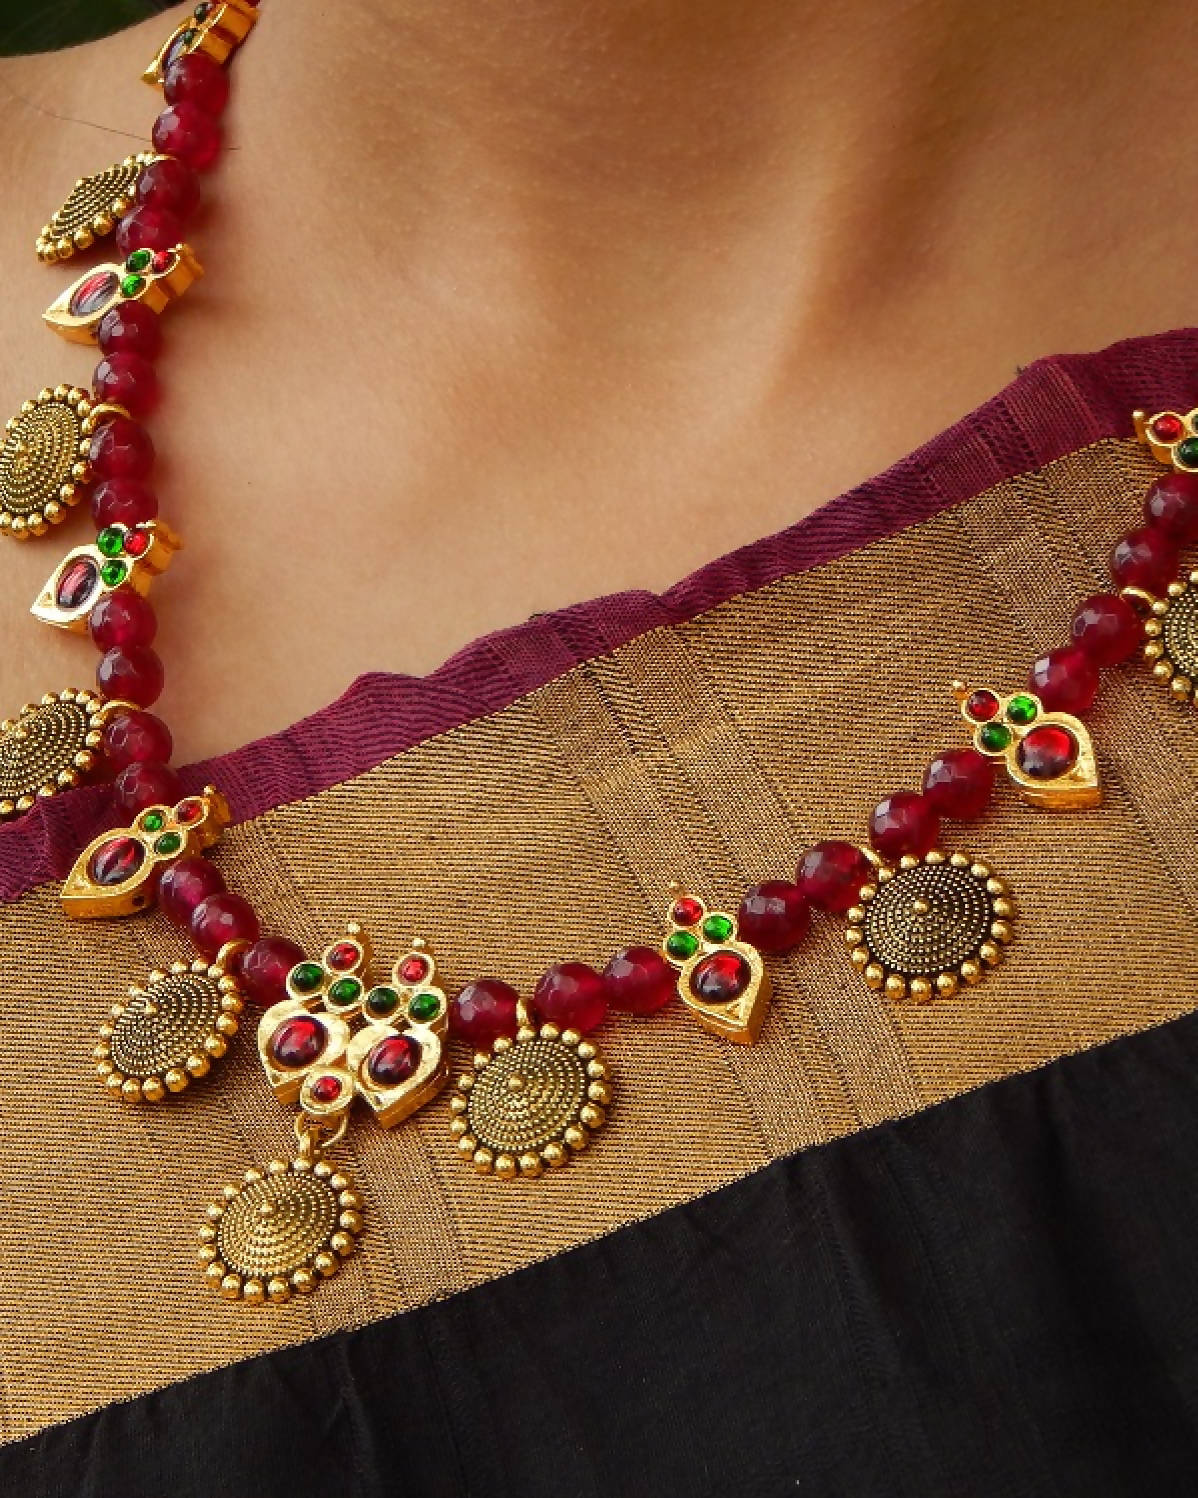 Oxidized Coin charms with Maroon Kemp motifs and Maroon Agate beads Necklace Set by Nishna Designs